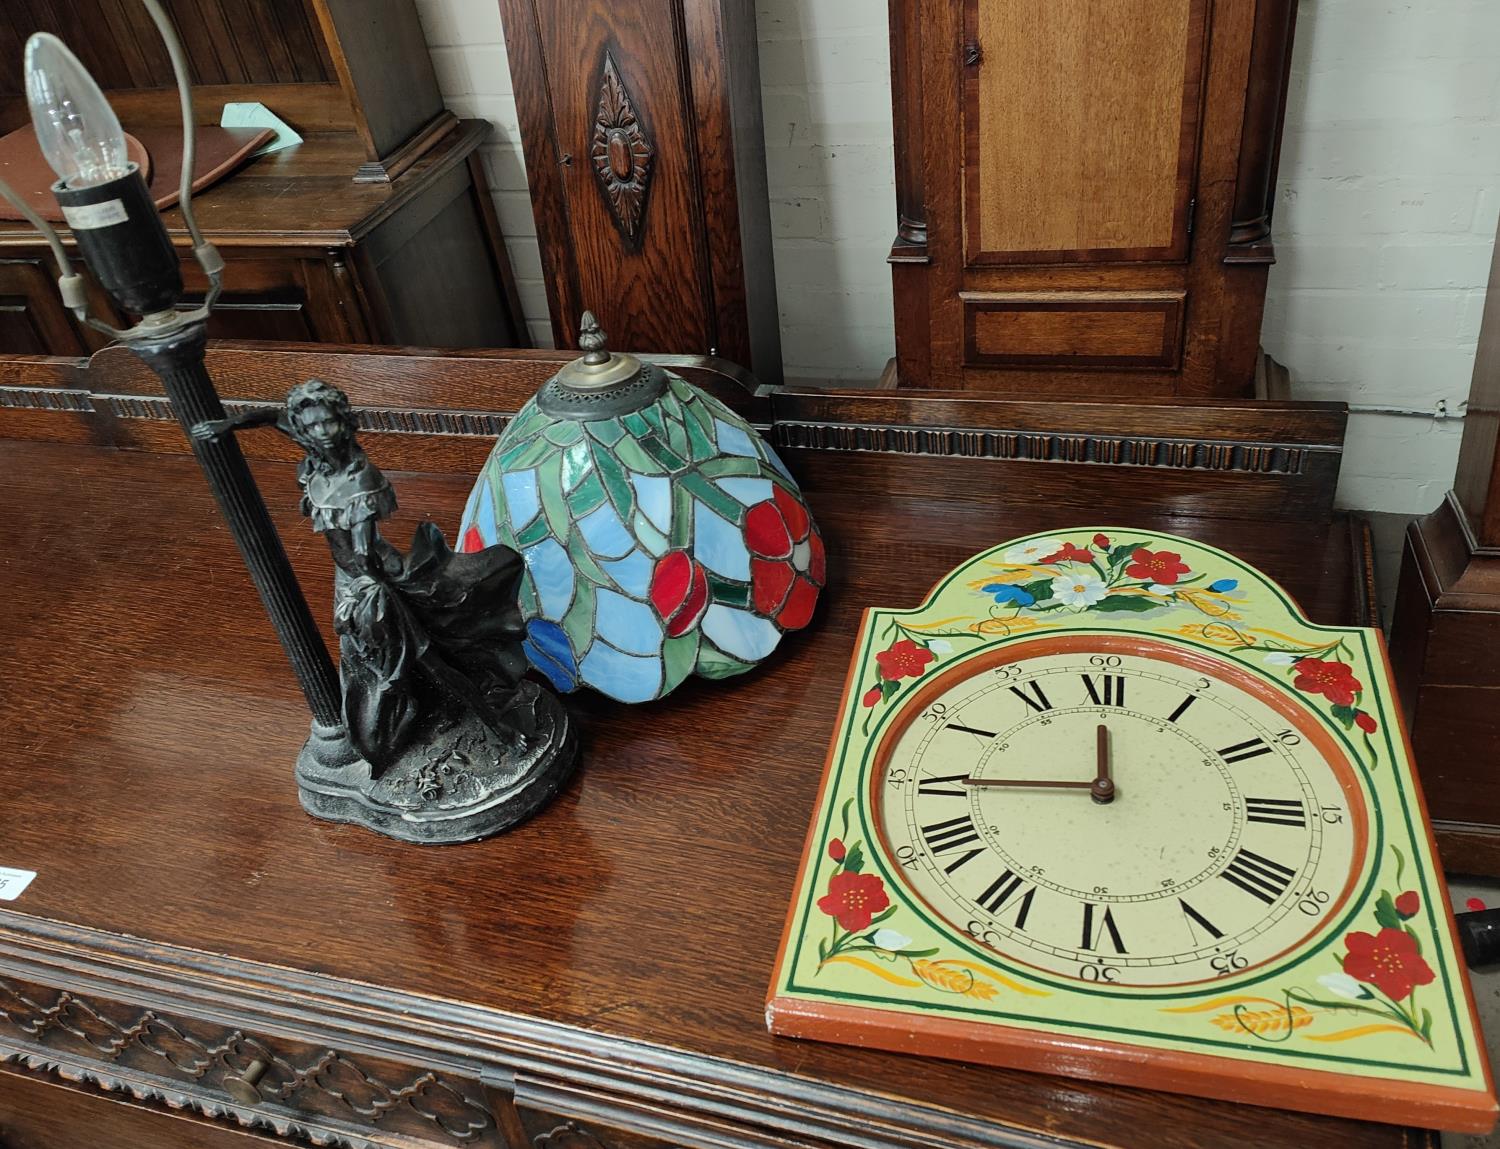 A Tiffany lamp and a painted dial wall clock